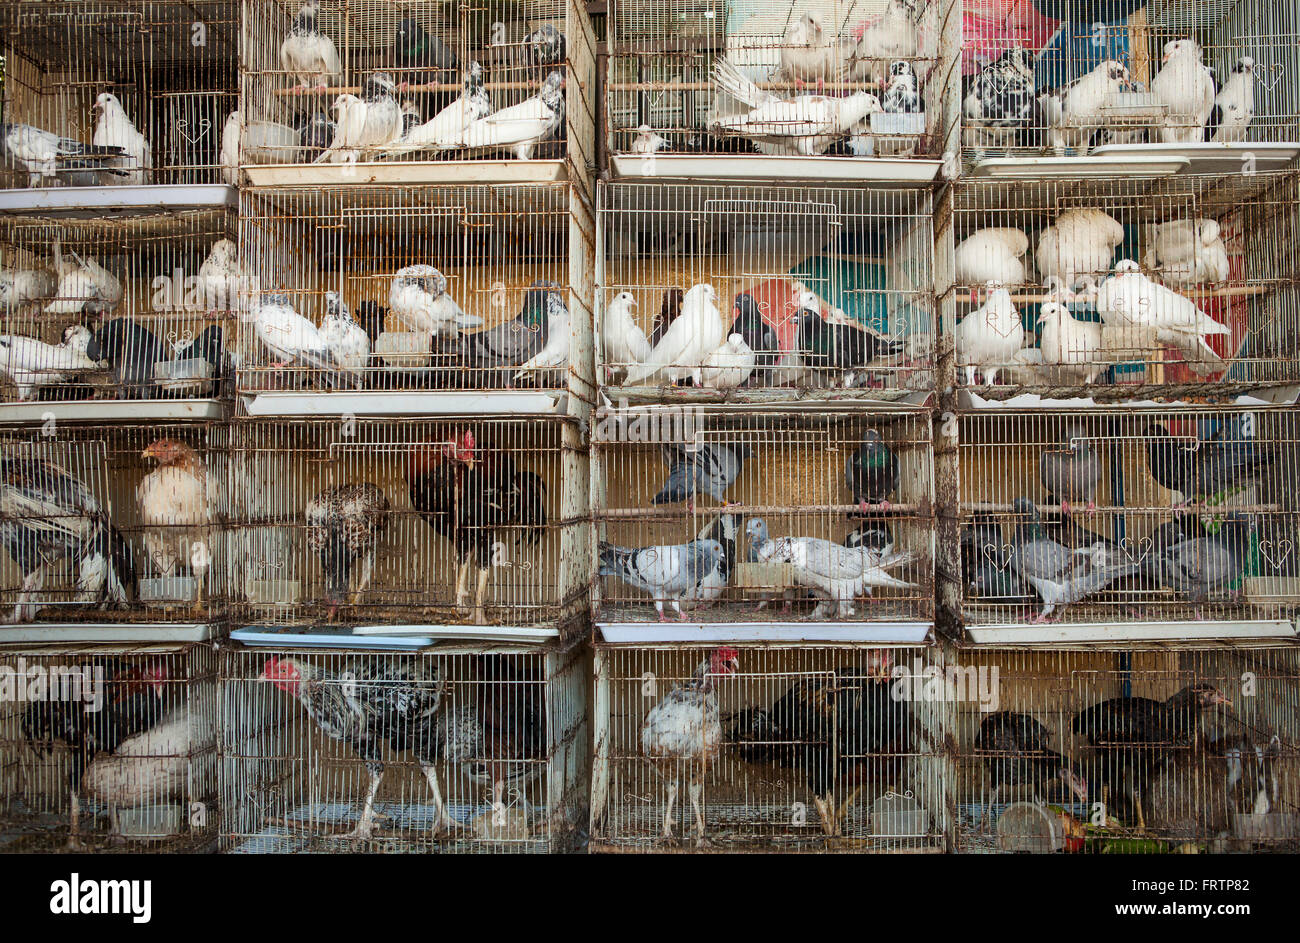 Pigeons and chickens in cages in the market. Salalah, Oman. Stock Photo